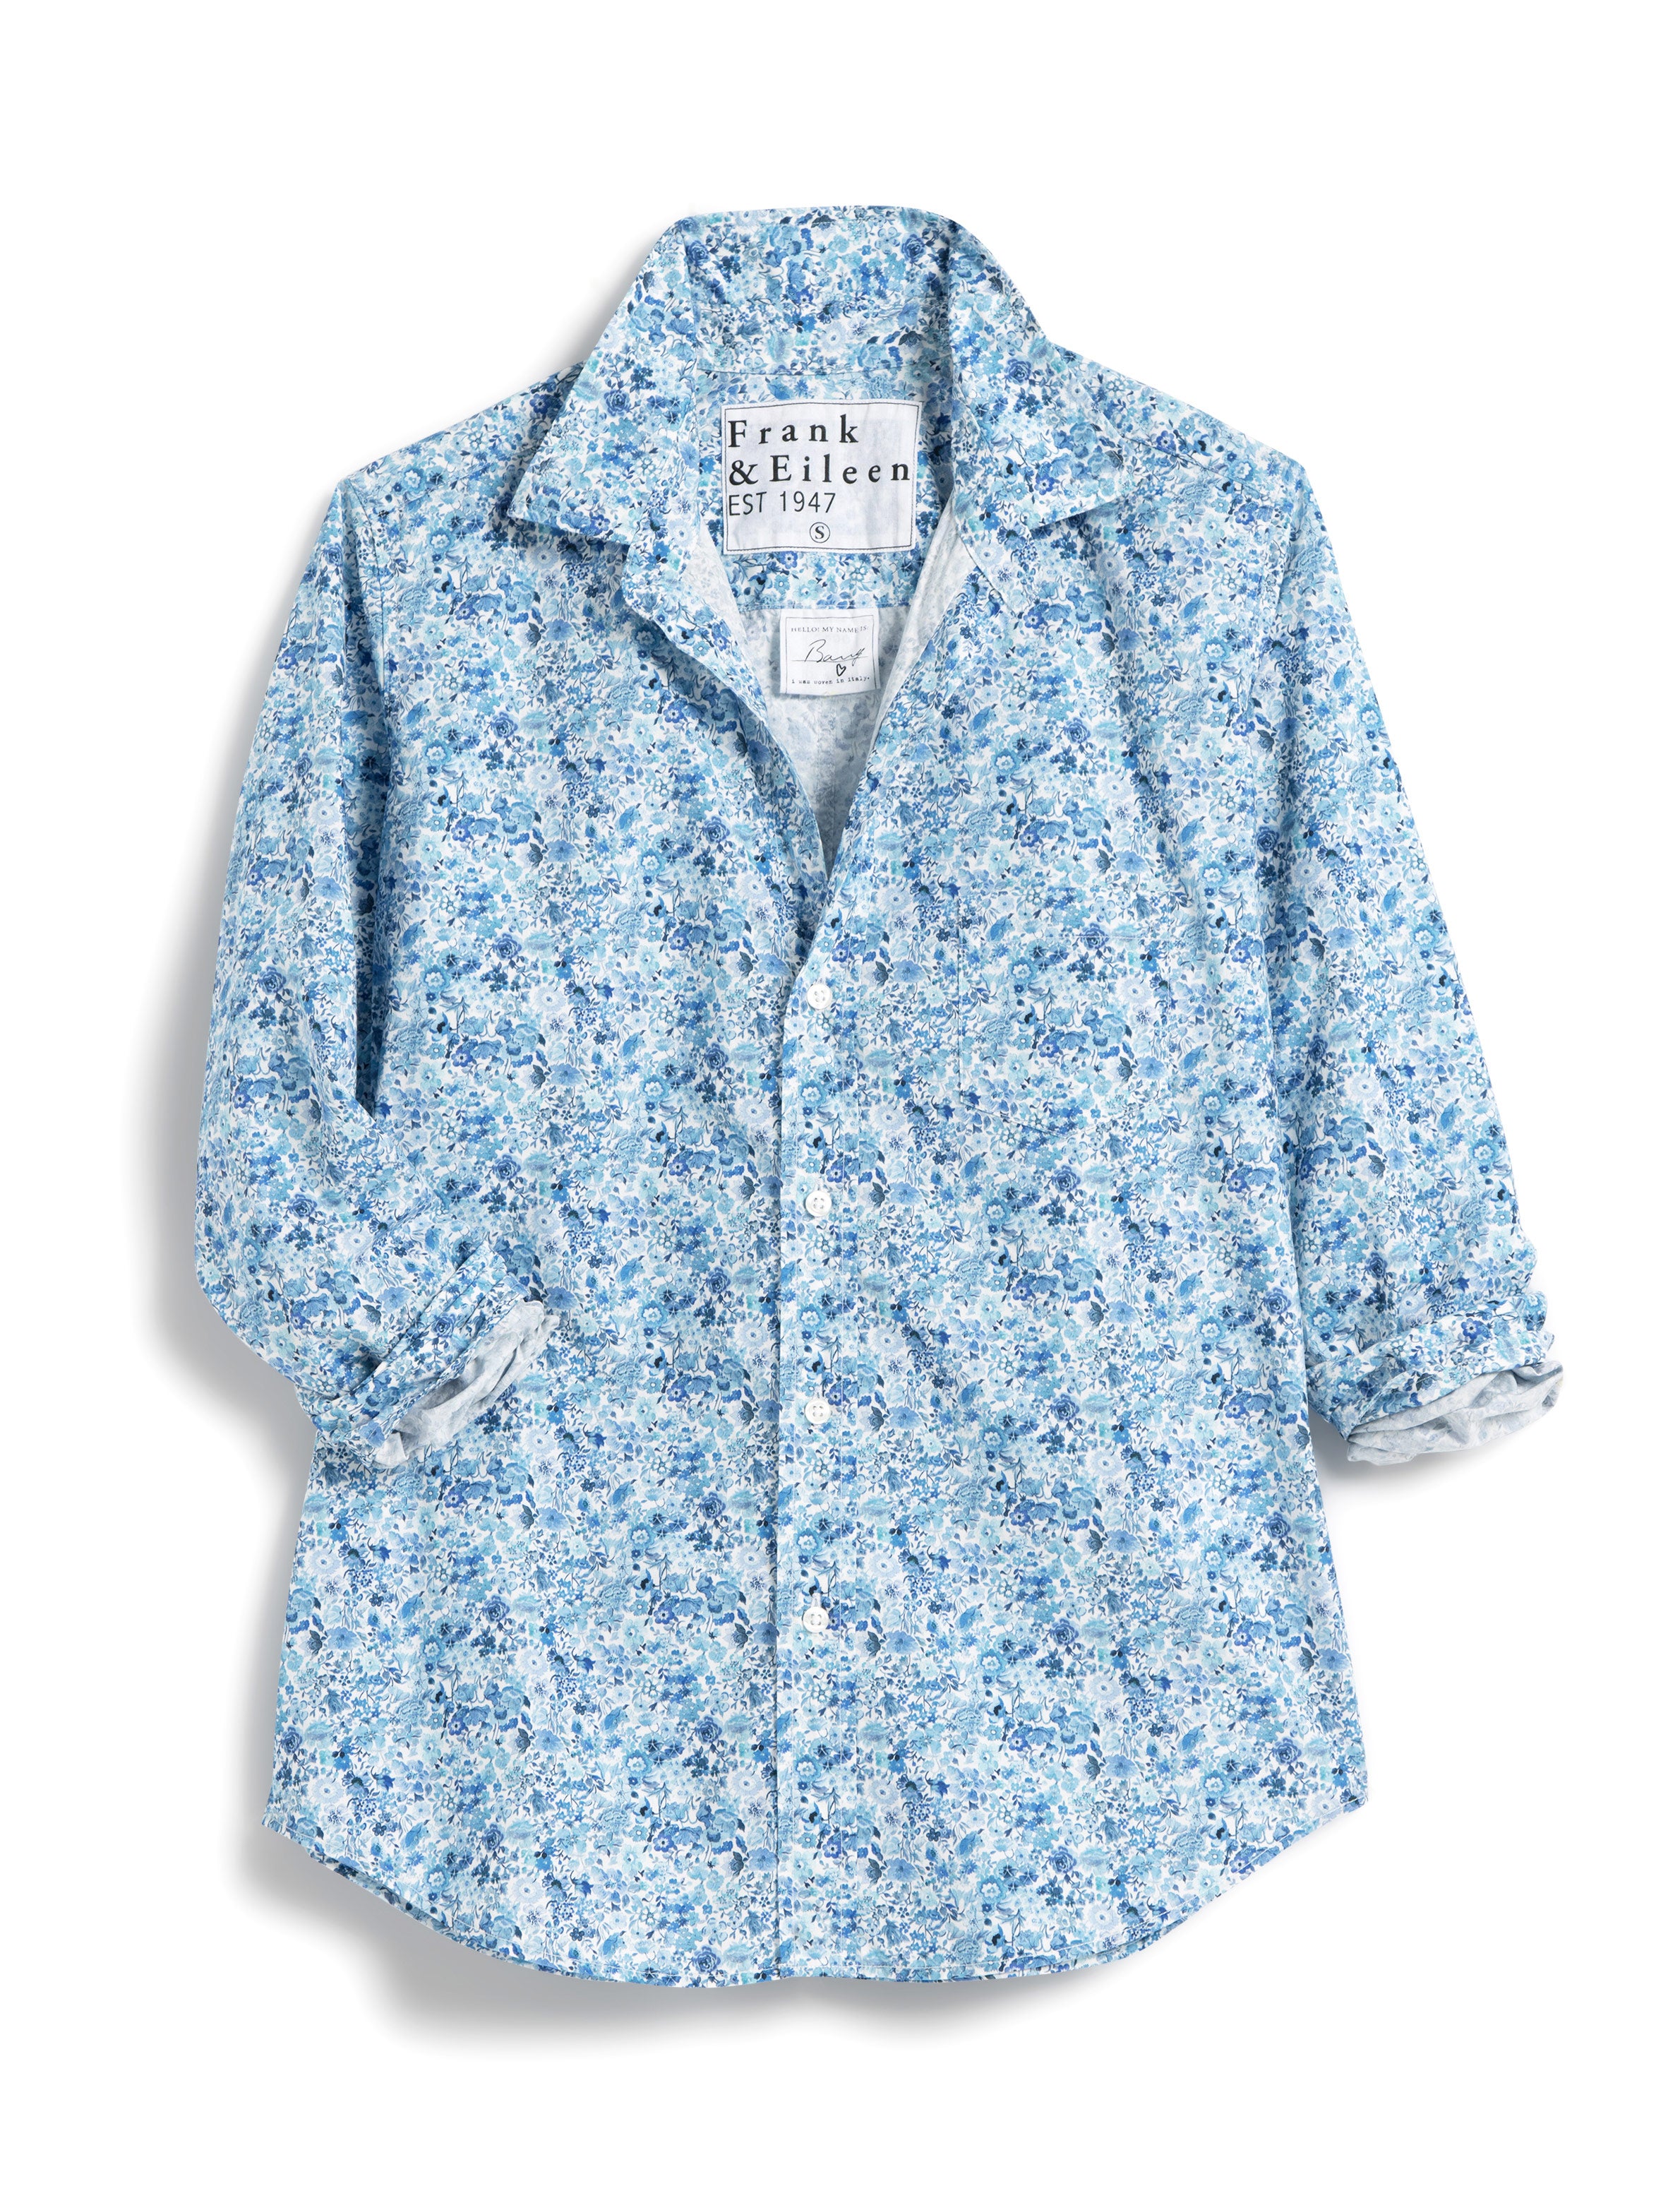 Frank & Eileen Barry Tailored Button Up Shirt in Blue Floral